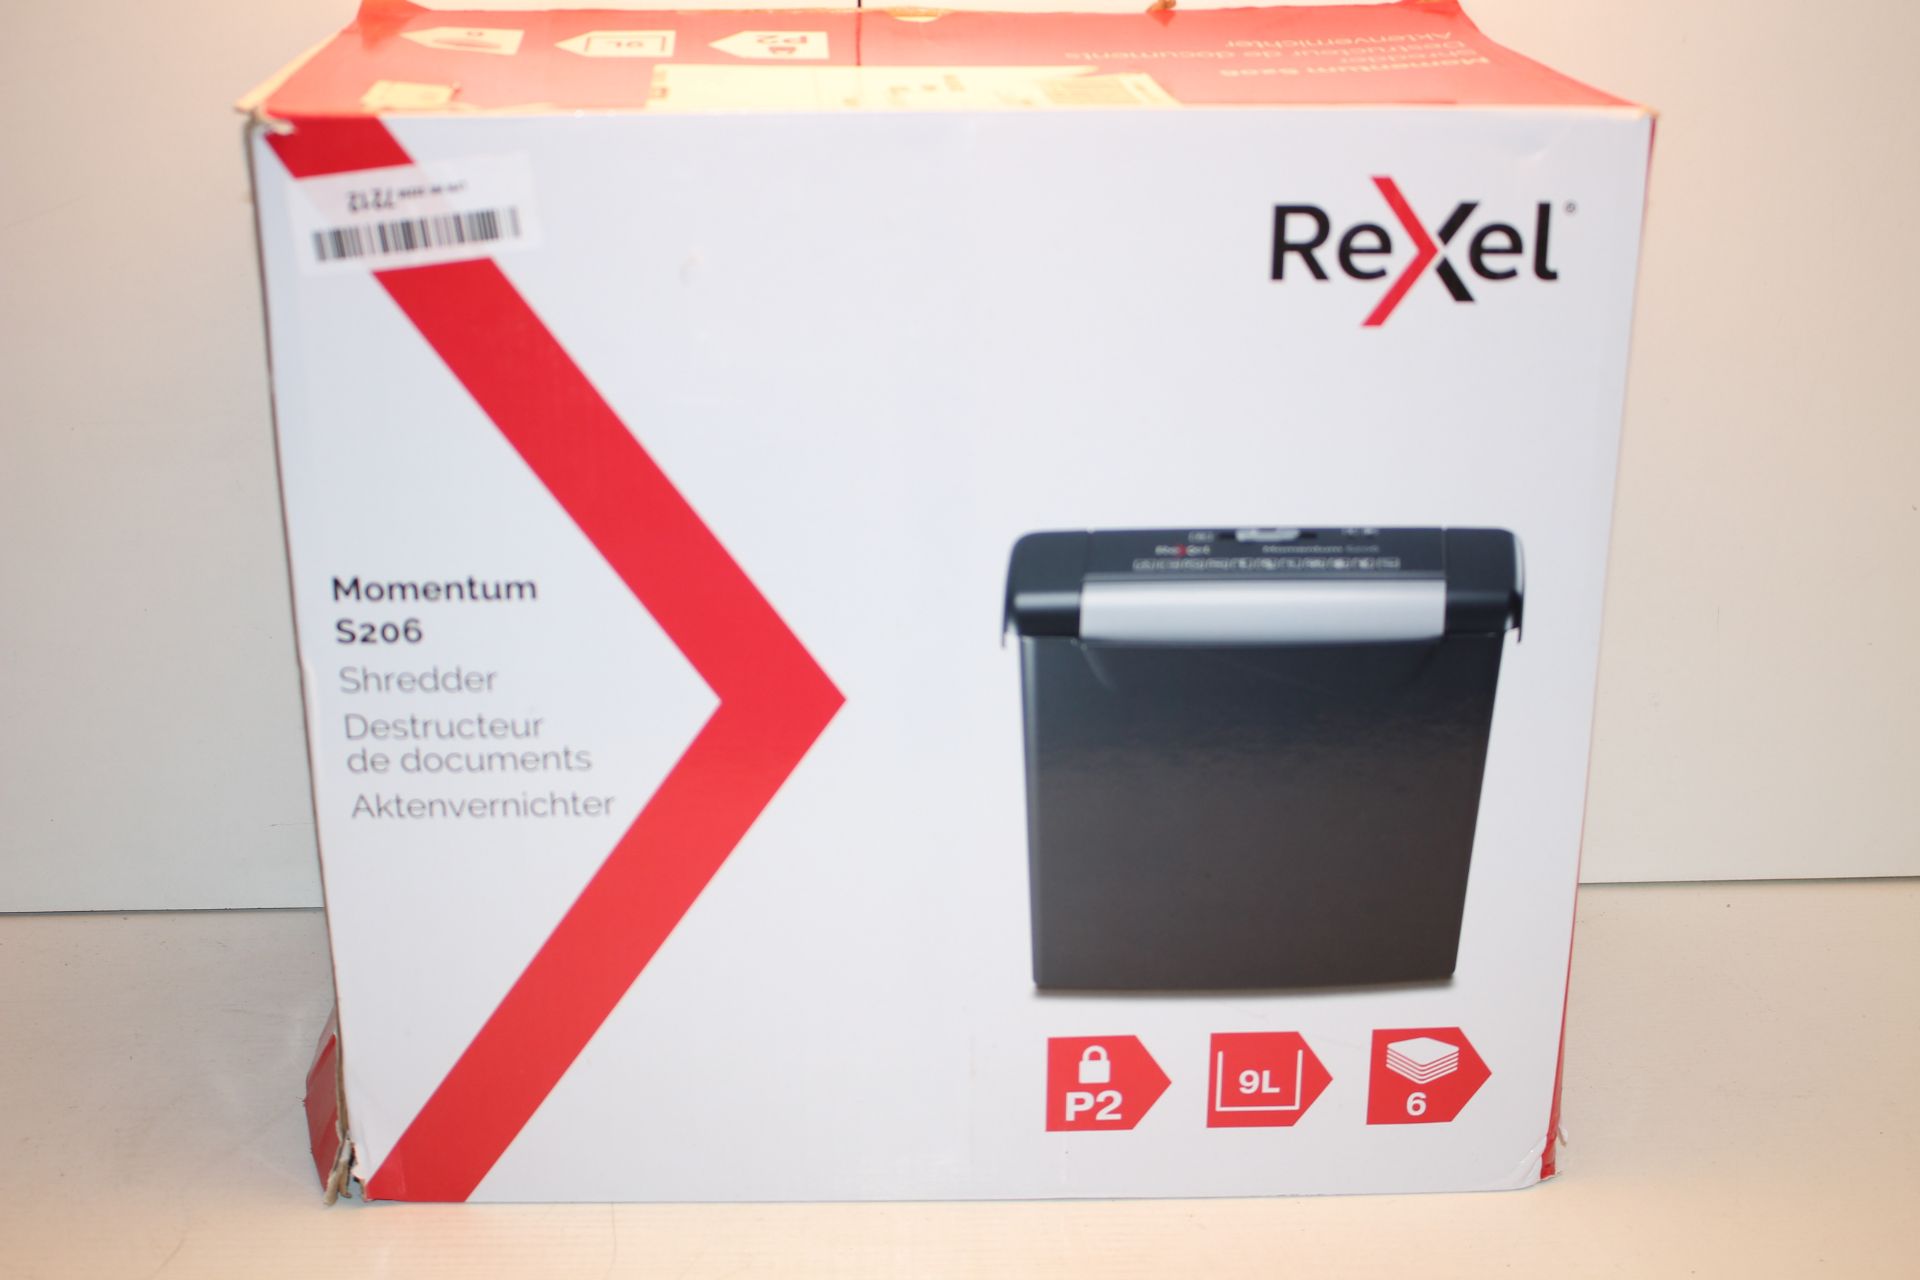 BOXED REXEL MOMENTUM S206 SHREDDER RRP £33.46Condition ReportAppraisal Available on Request- All